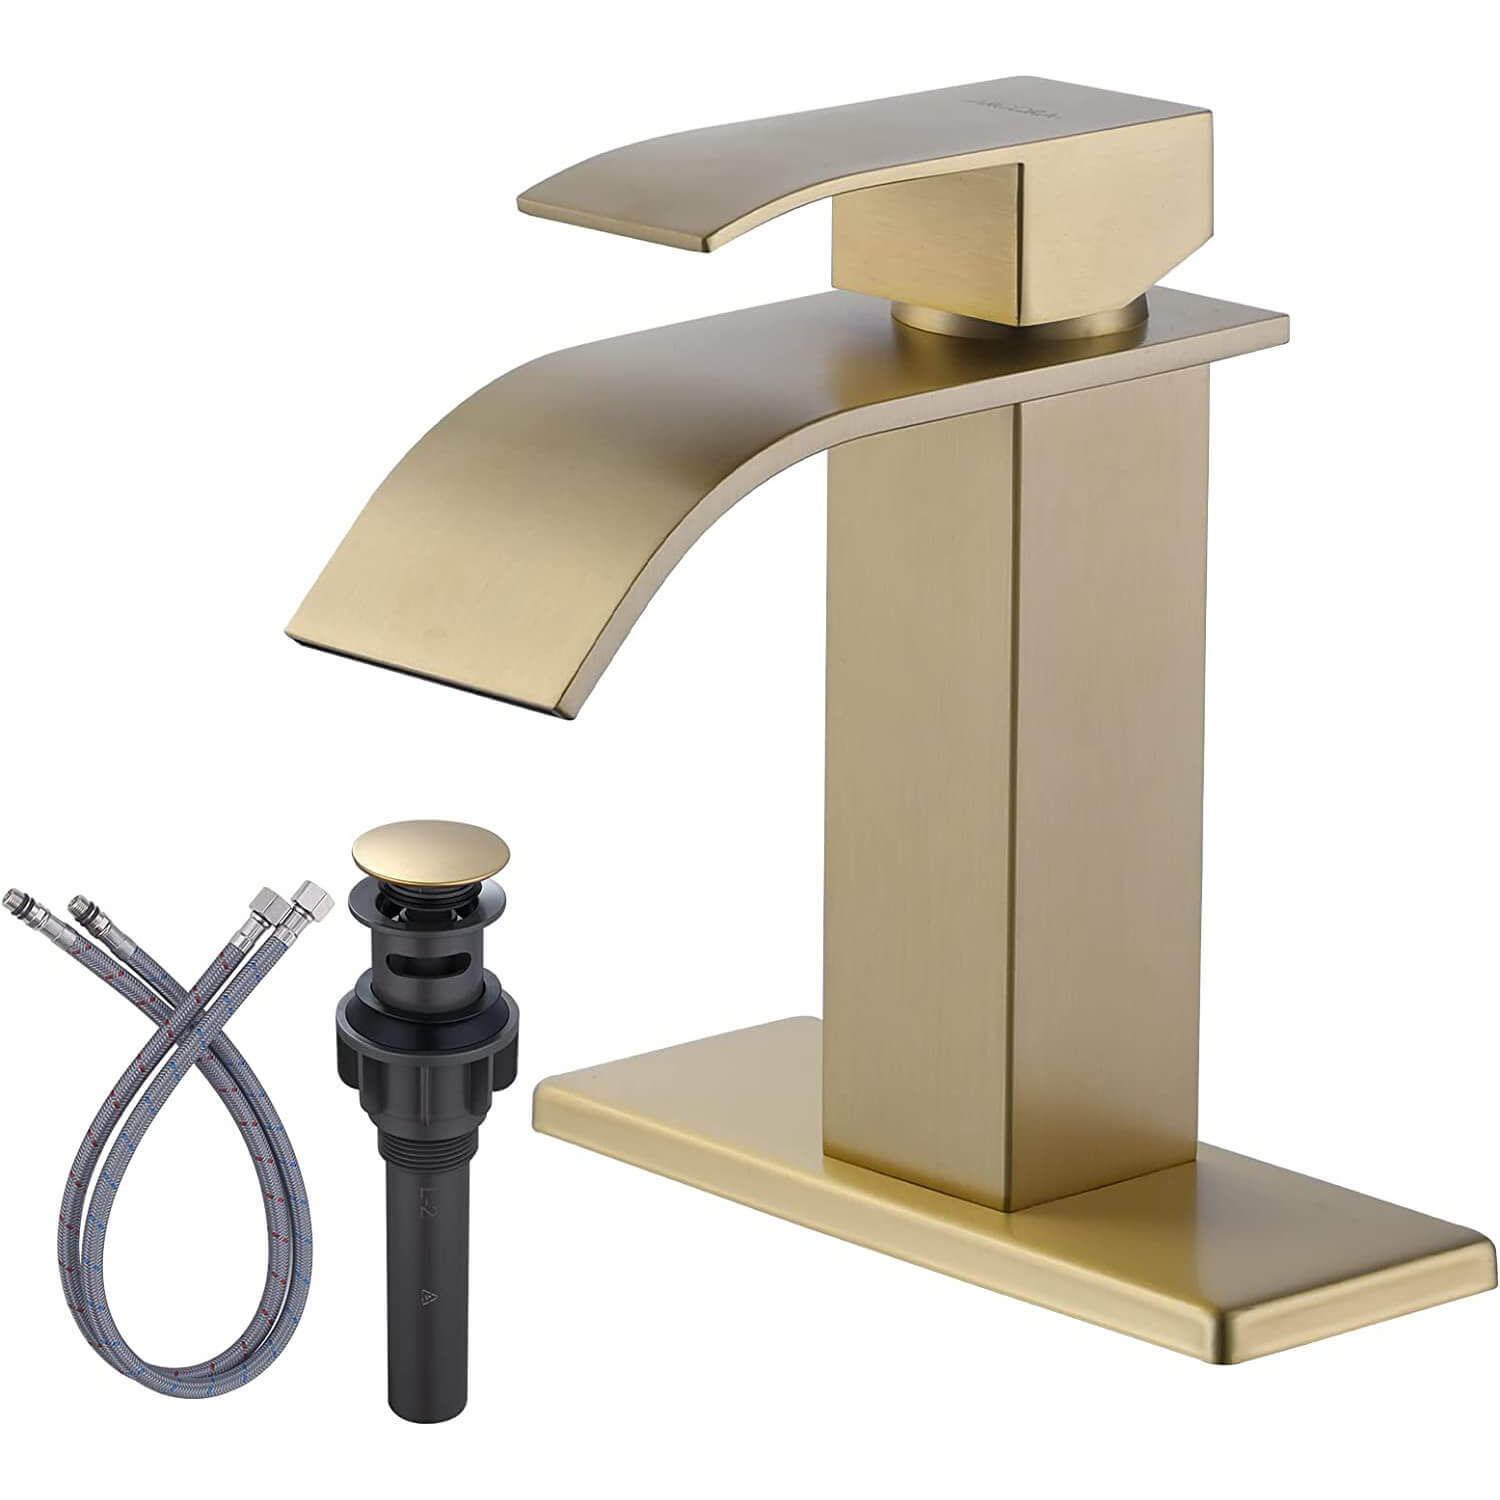 iVIGA Brushed Gold Bathroom Faucet Waterfall Spout Faucet for Bathroom Sink